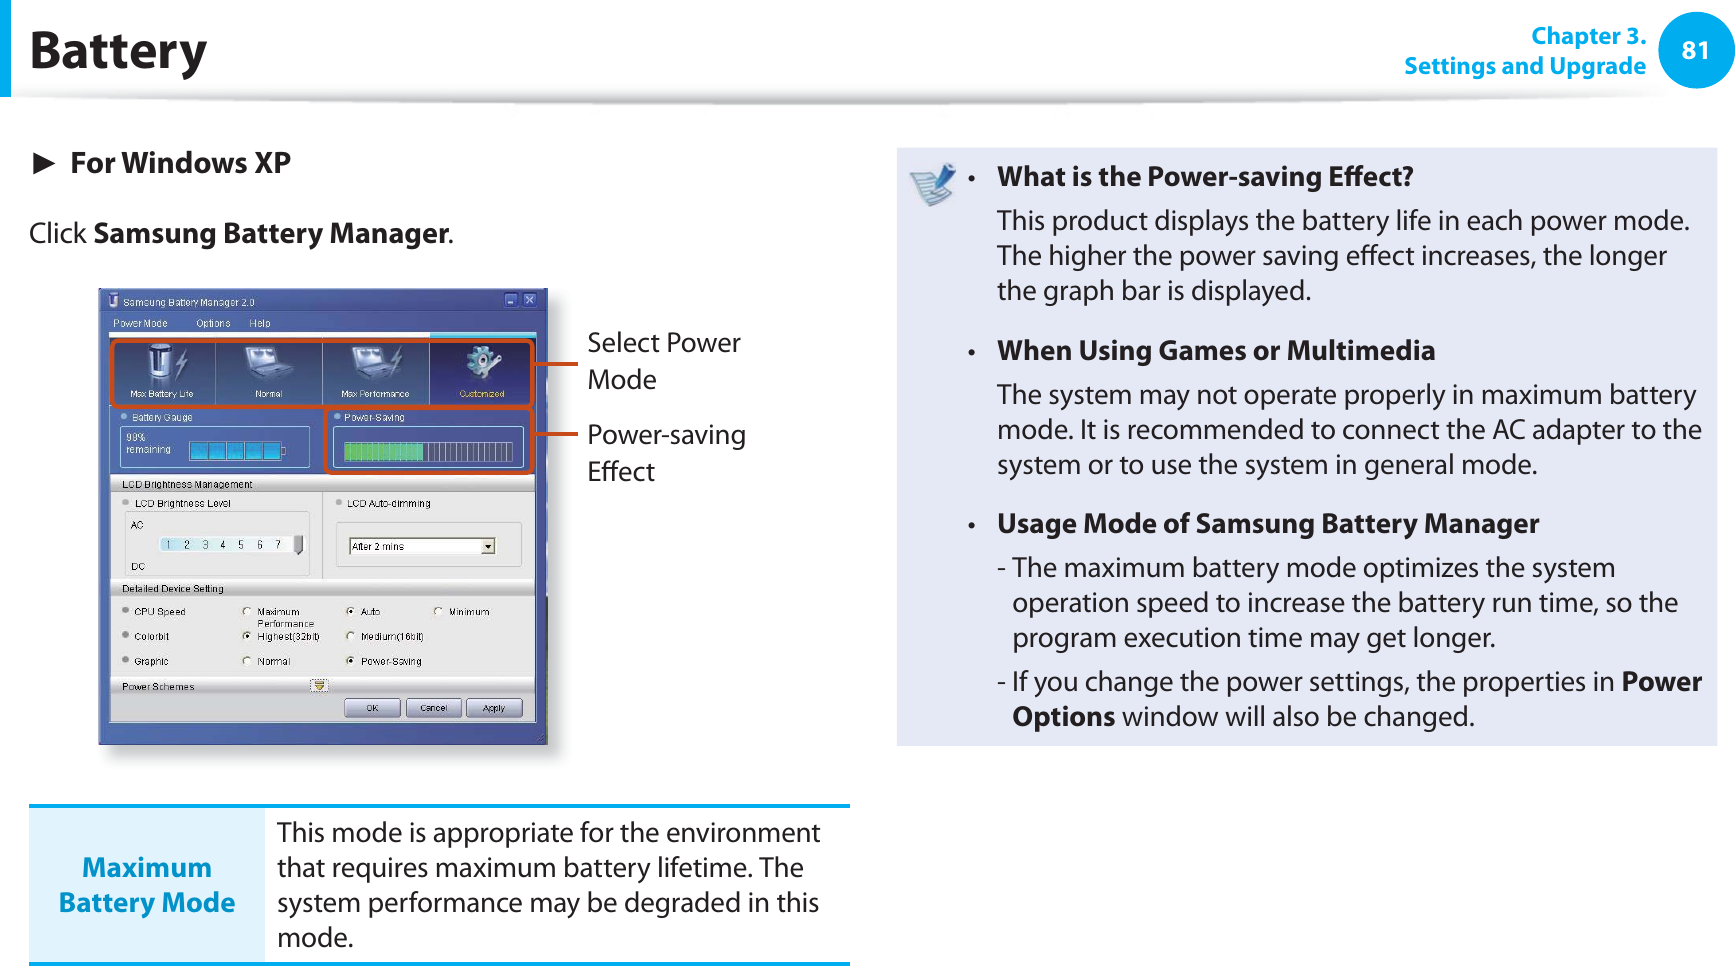 81 Chapter  3.Settings and UpgradeBattery► For Windows XPClick Samsung Battery Manager.Select Power ModePower-saving Eﬀ ectMaximum Battery ModeThis mode is appropriate for the environment that requires maximum battery lifetime. The system performance may be degraded in this mode.What is the Power-saving Eﬀ ect?t   This product displays the battery life in each power mode. The higher the power saving eﬀ ect increases, the longer the graph bar is displayed.When Using Games or Multimediat   The system may not operate properly in maximum battery mode. It is recommended to connect the AC adapter to the system or to use the system in general mode.Usage Mode of Samsung Battery Managert   -  The maximum battery mode optimizes the system operation speed to increase the battery run time, so the program execution time may get longer.  -  If you change the power settings, the properties in Power Options window will also be changed.